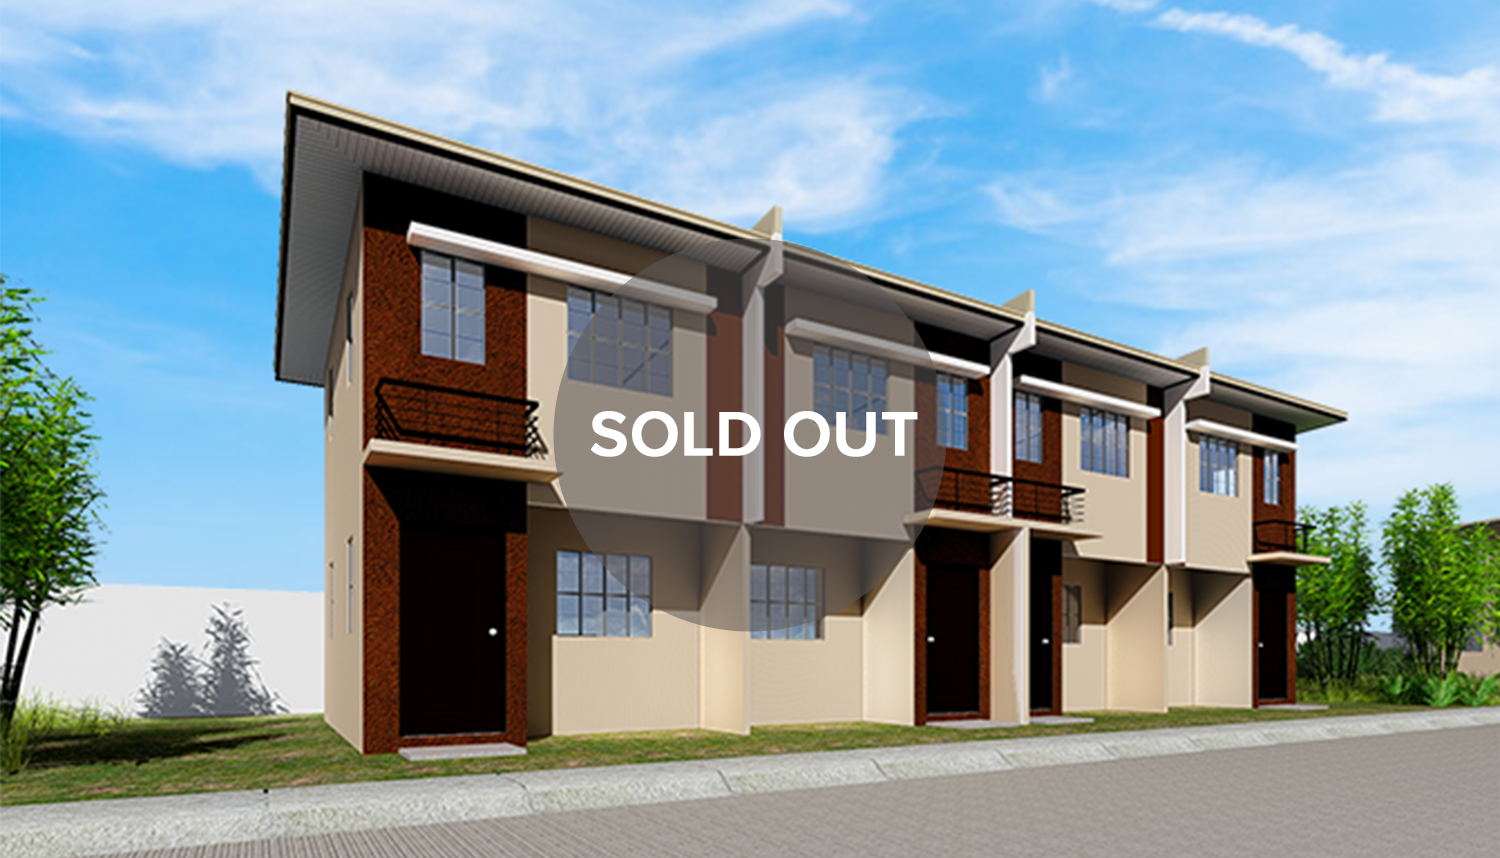 angeli townhouse image 2 sold out | Affordable House and Lot For Sale In The Philippines